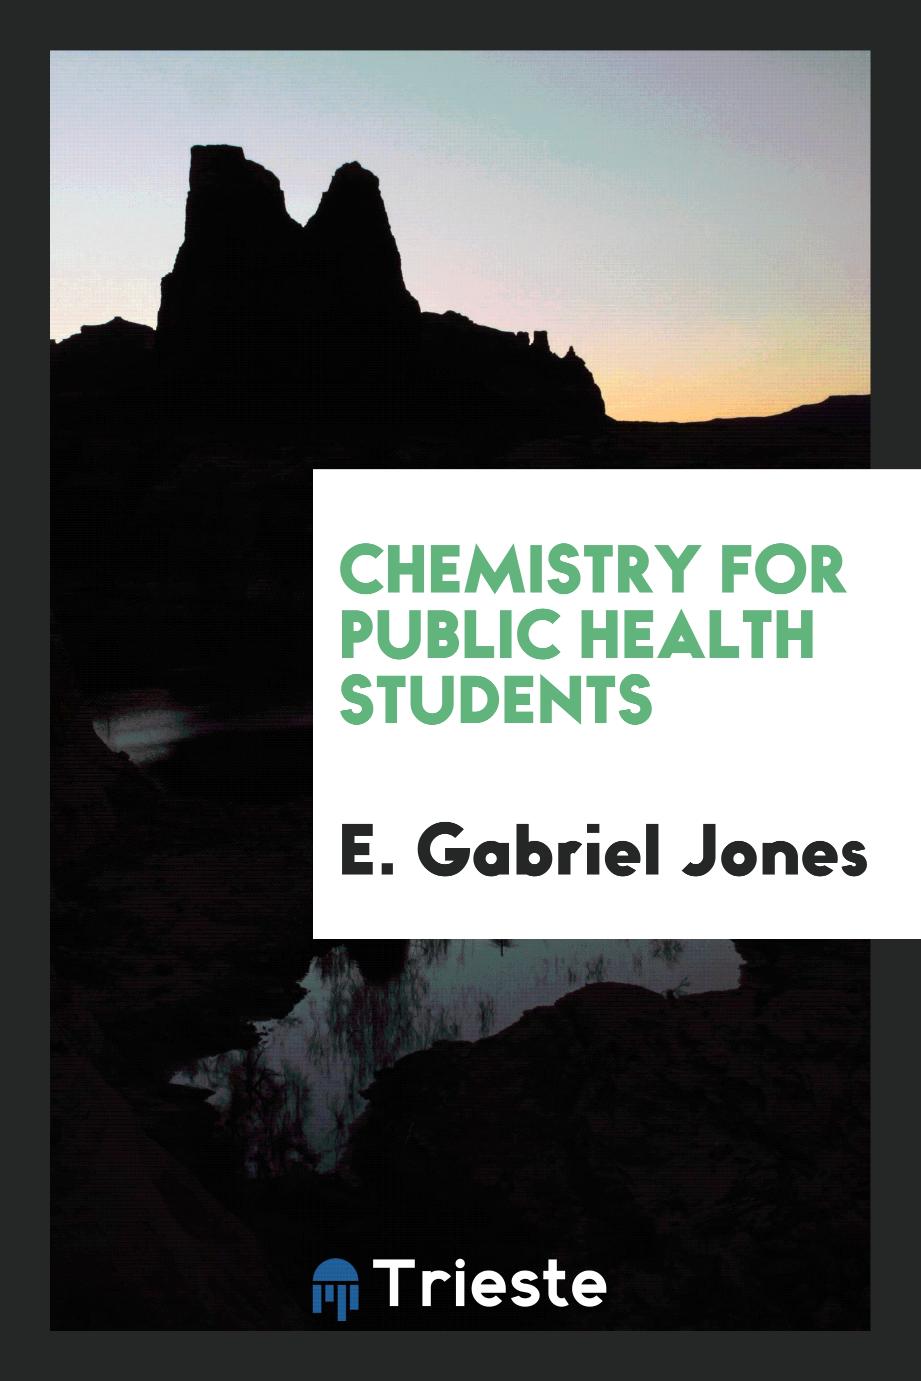 Chemistry for public health students